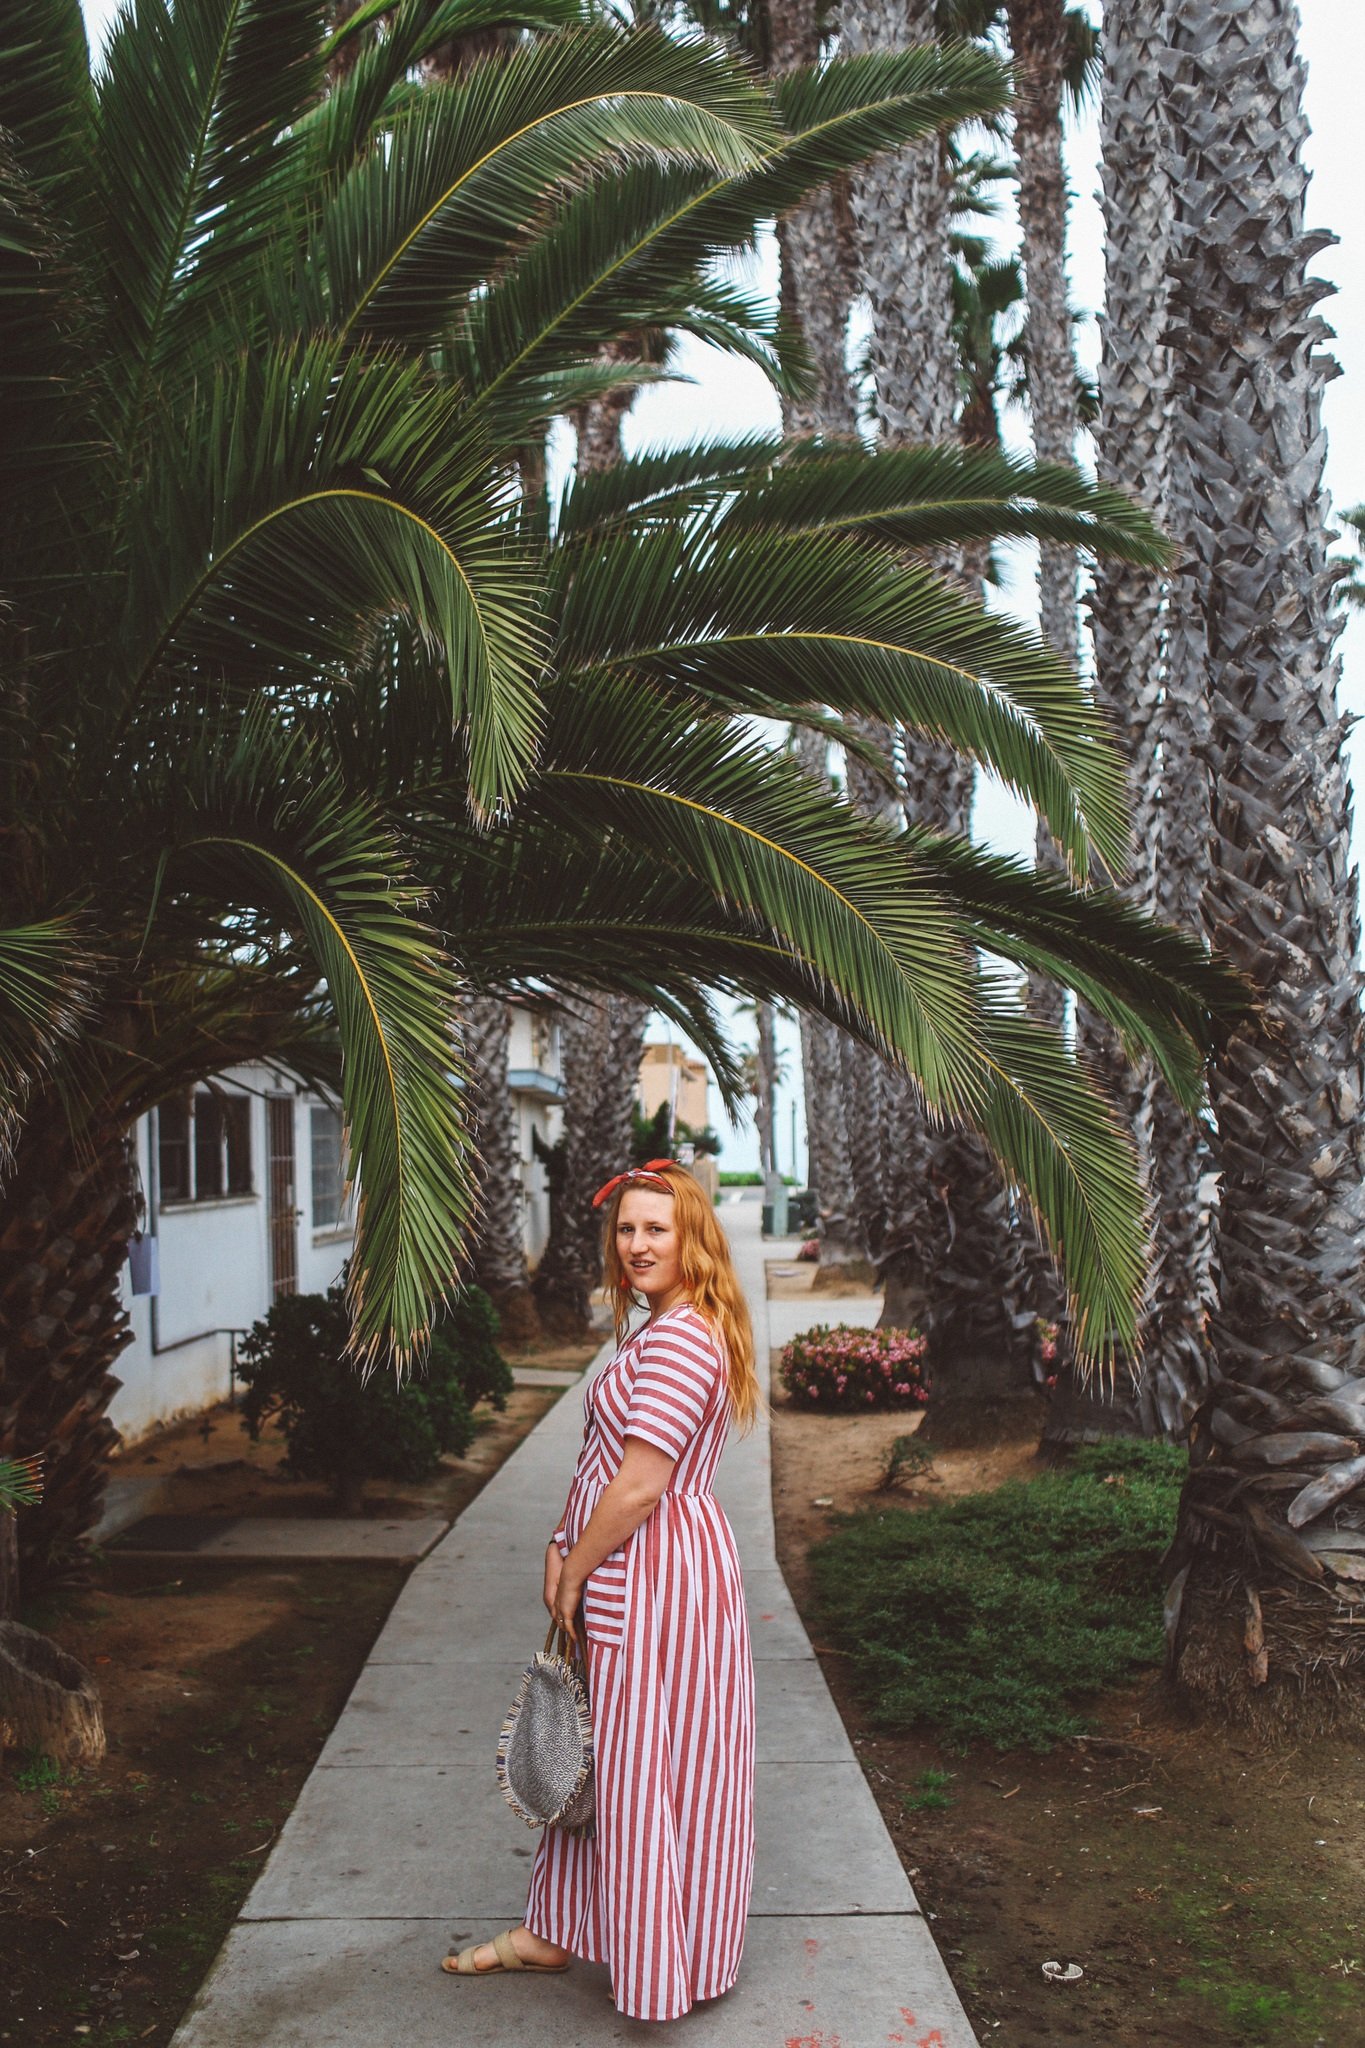 Wearing a red and white stripe dress amongst the palm trees in Oceanside, Ca